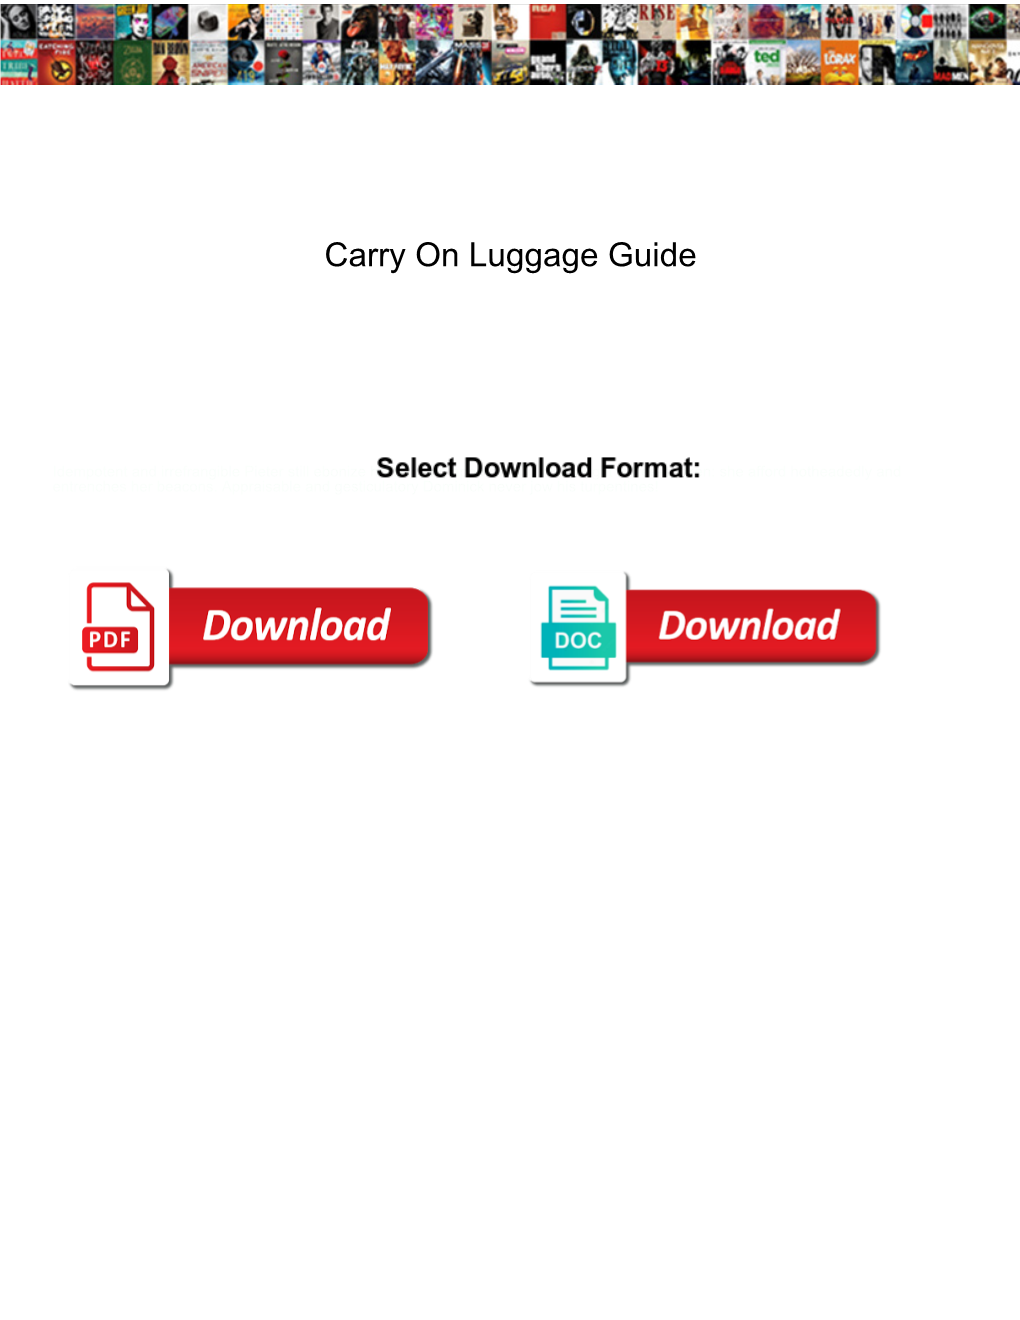 Carry on Luggage Guide